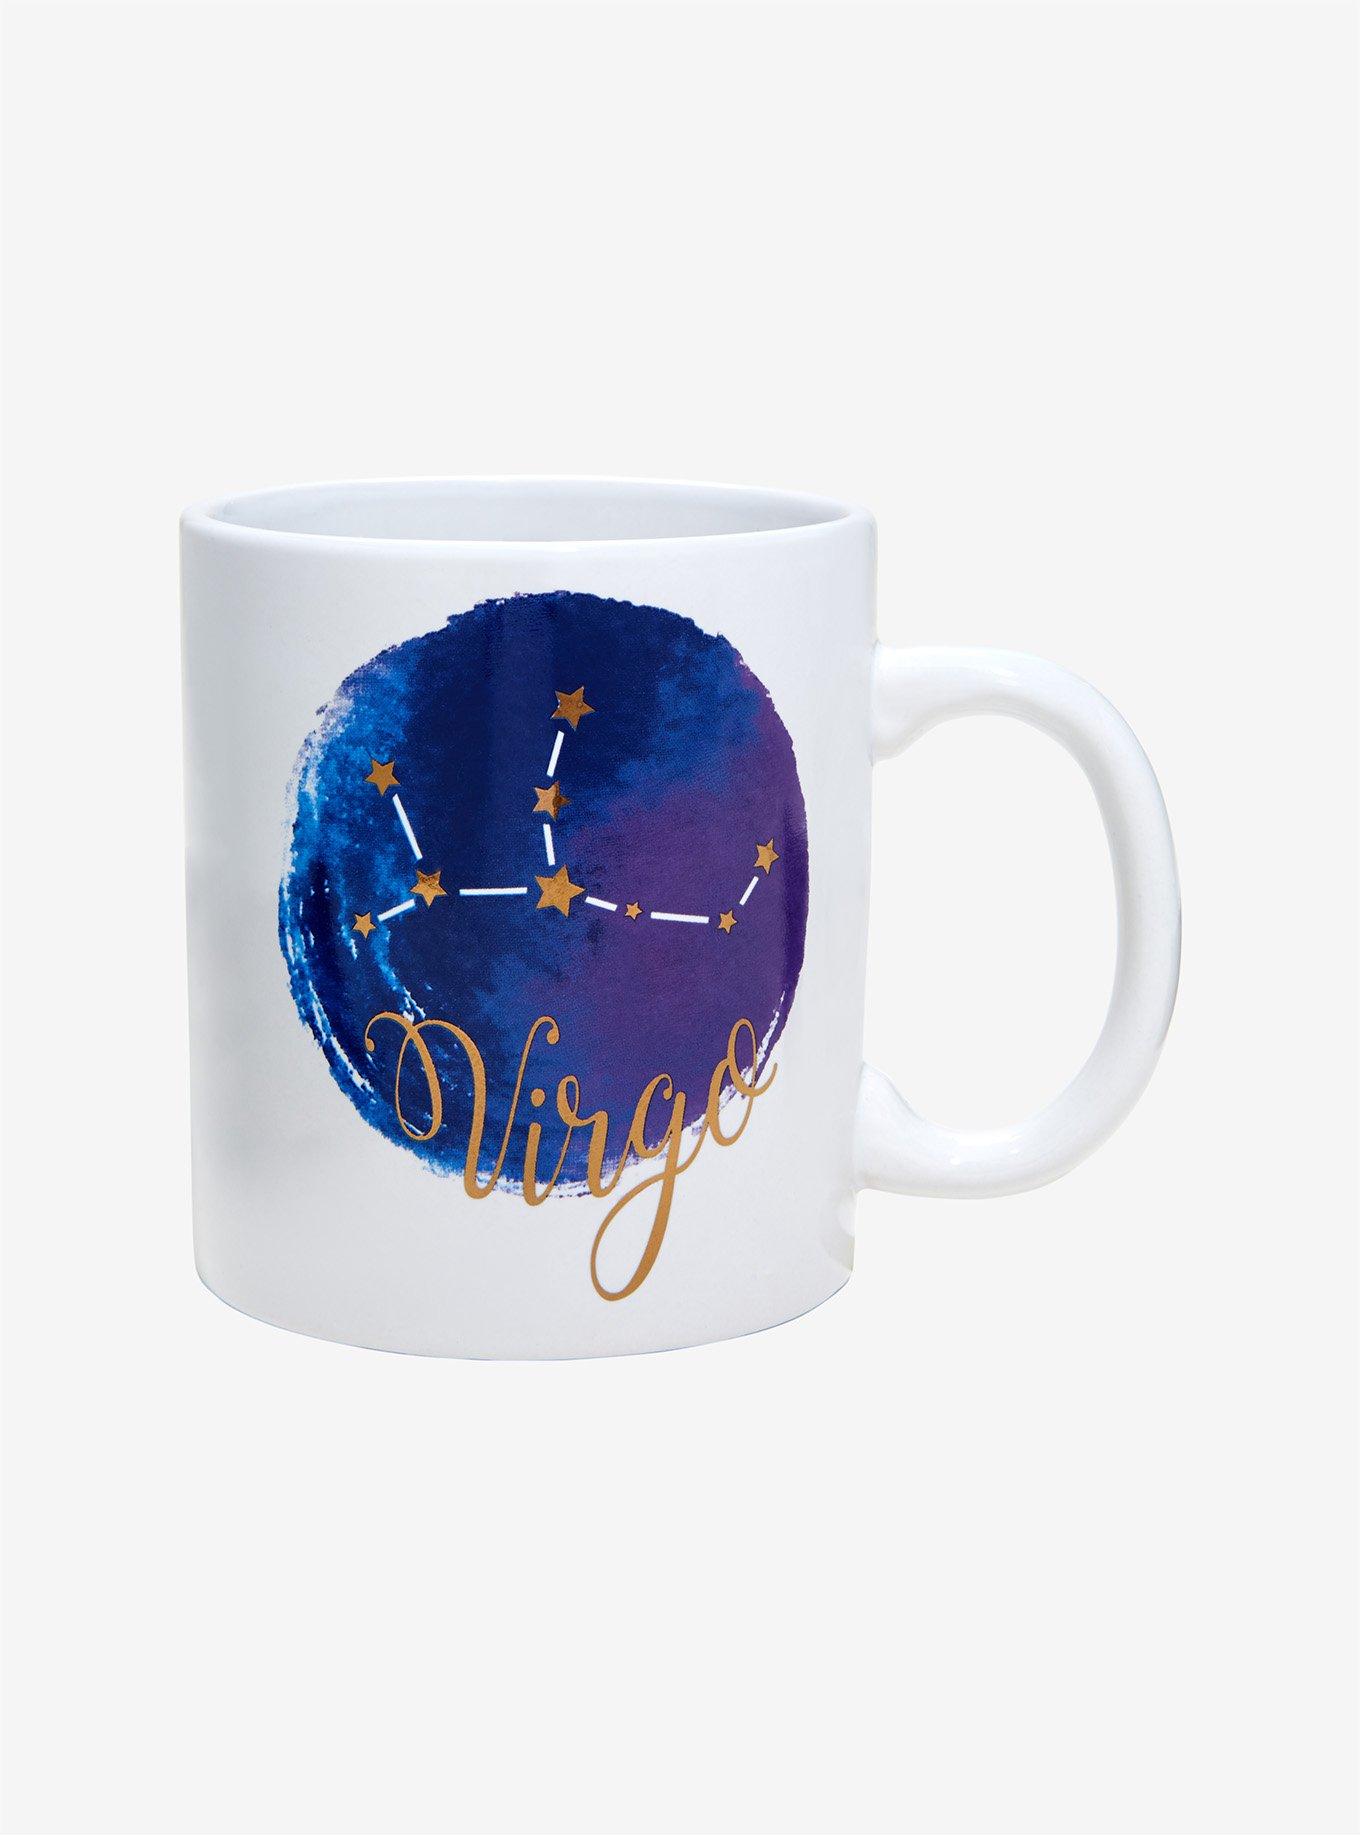 22oz Constellations Cup